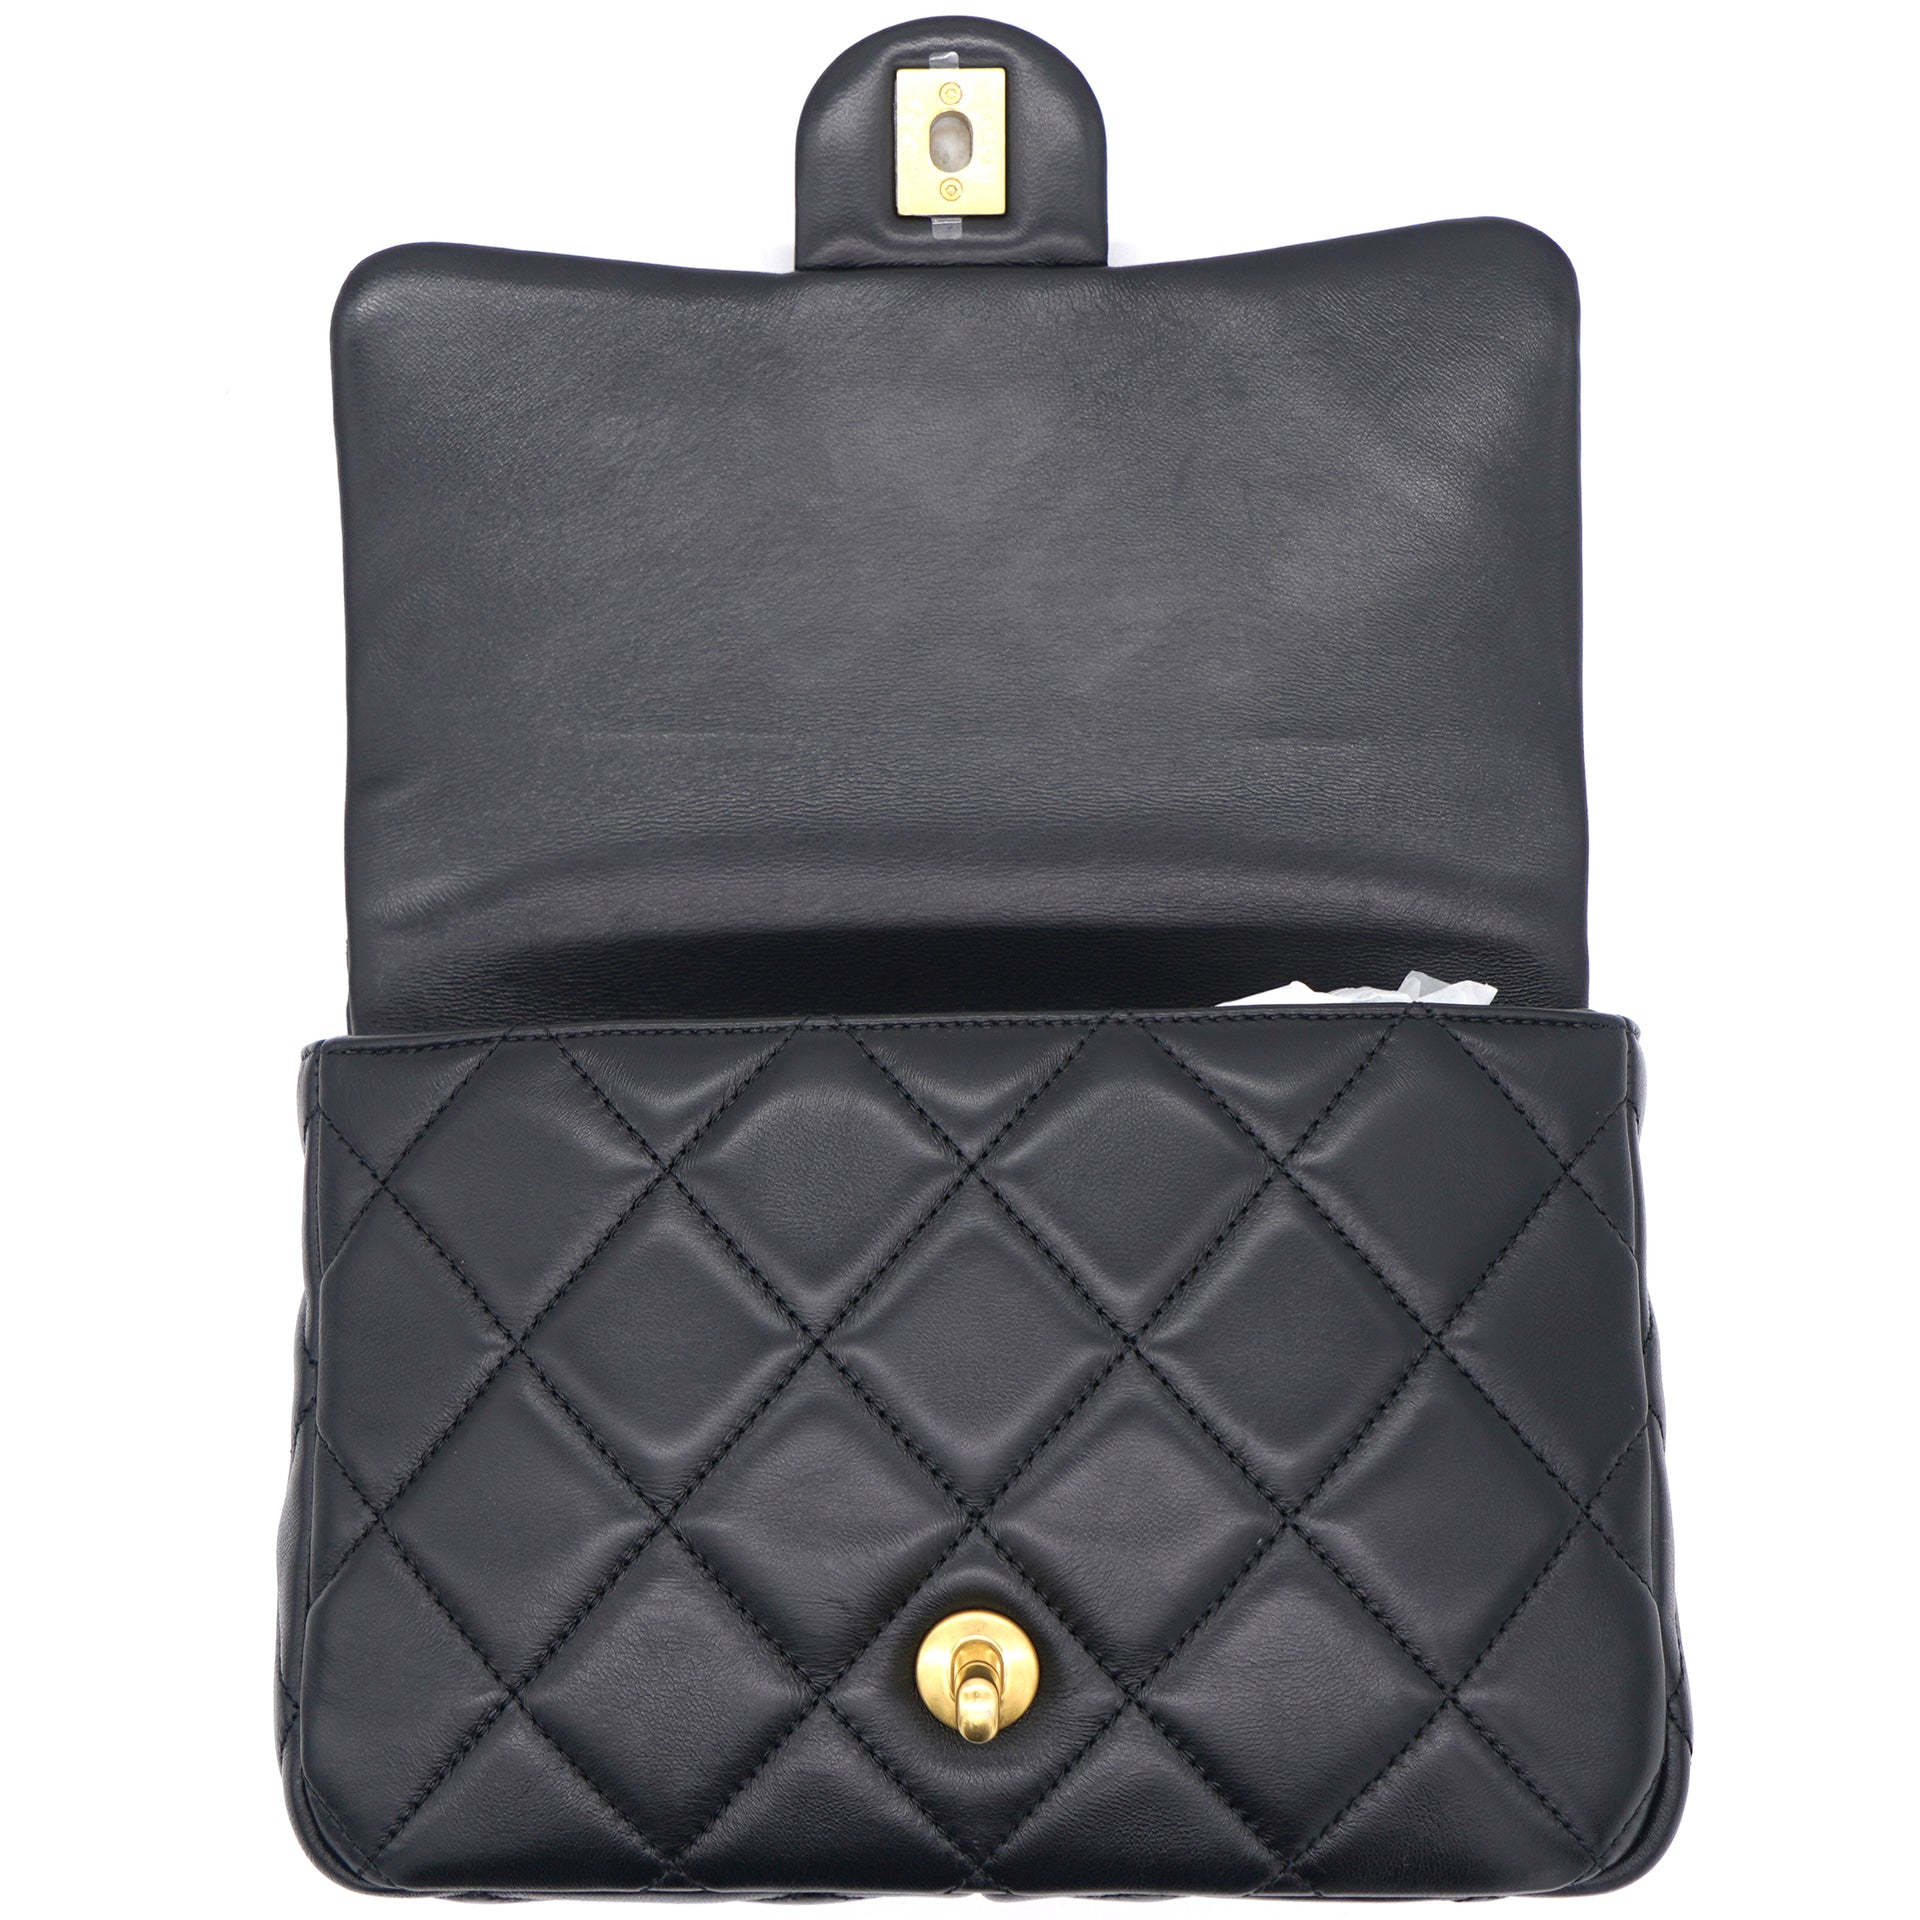 Chanel Enamel Quilted Pending CC Mini Square Lambskin Flap Bag